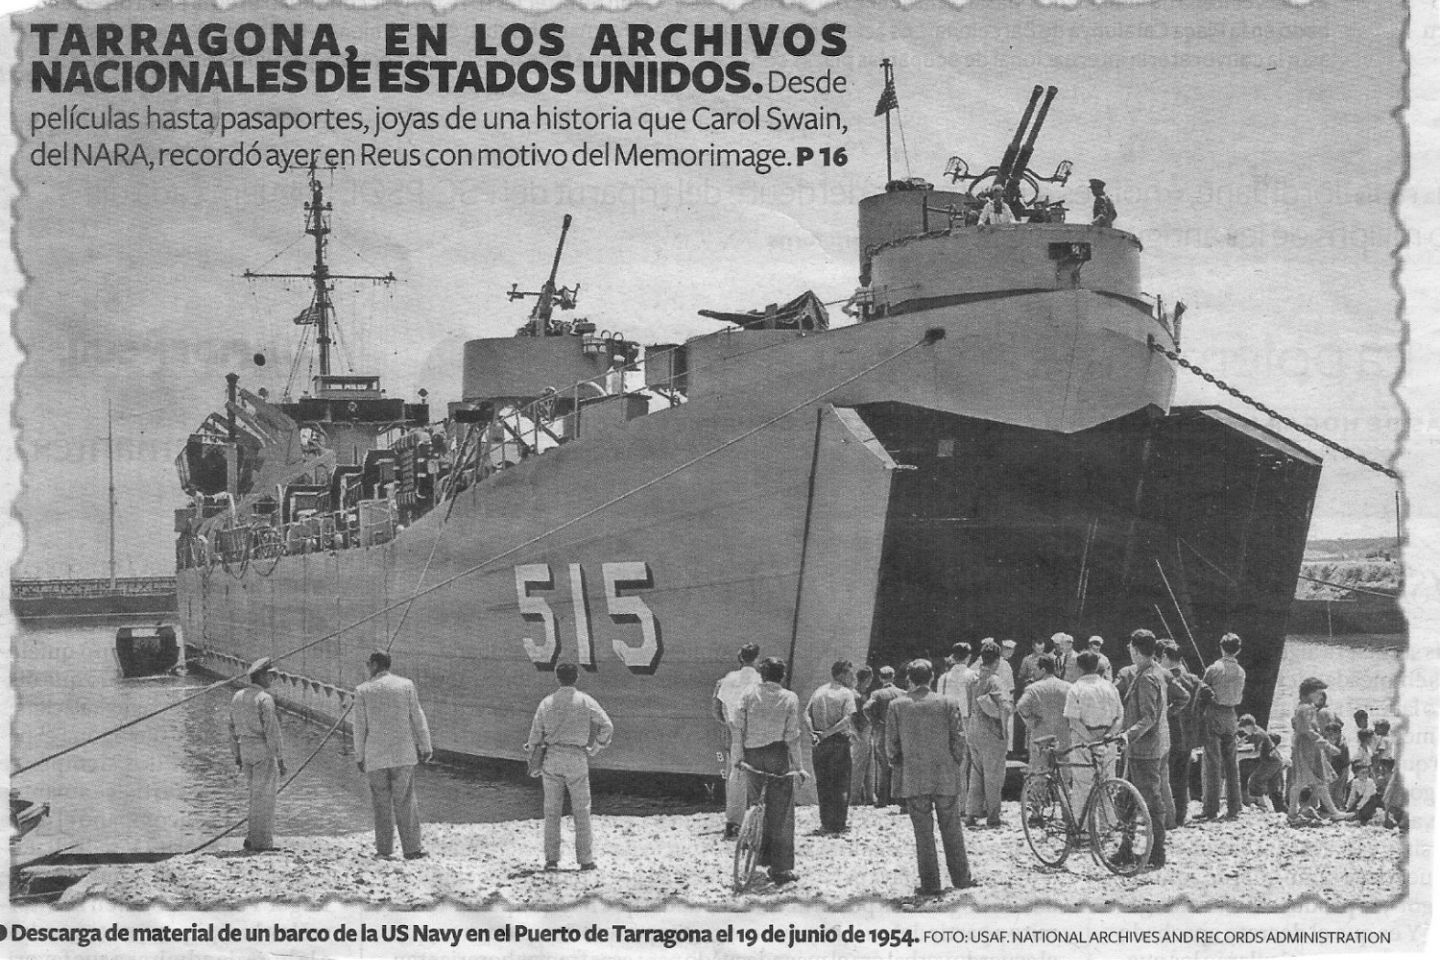 USS LST515 beached while unloading in Spain.